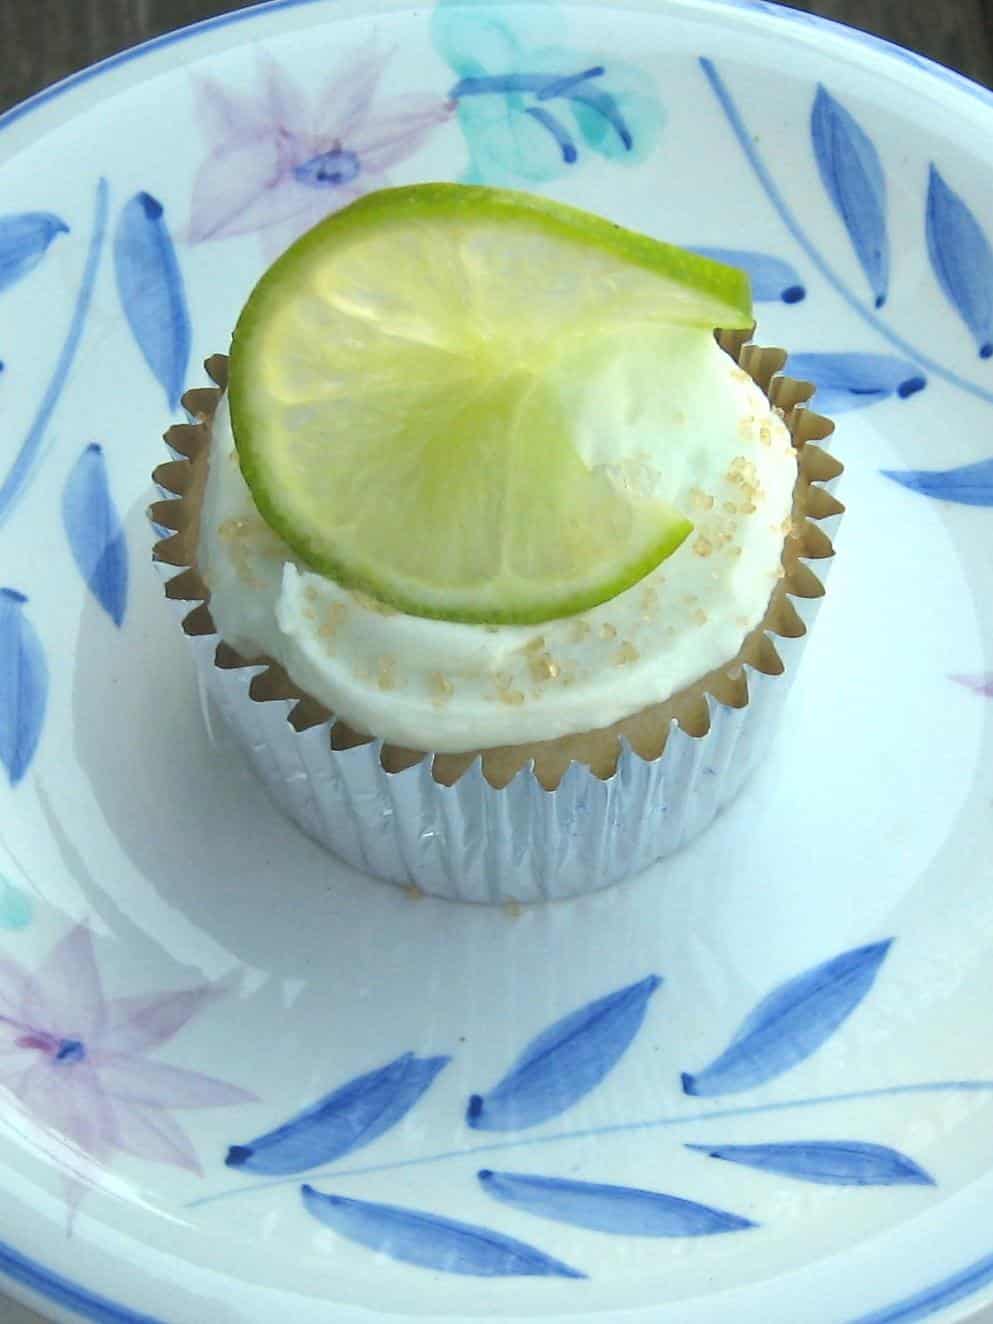  These cupcakes are the perfect dessert for any fiesta or party.